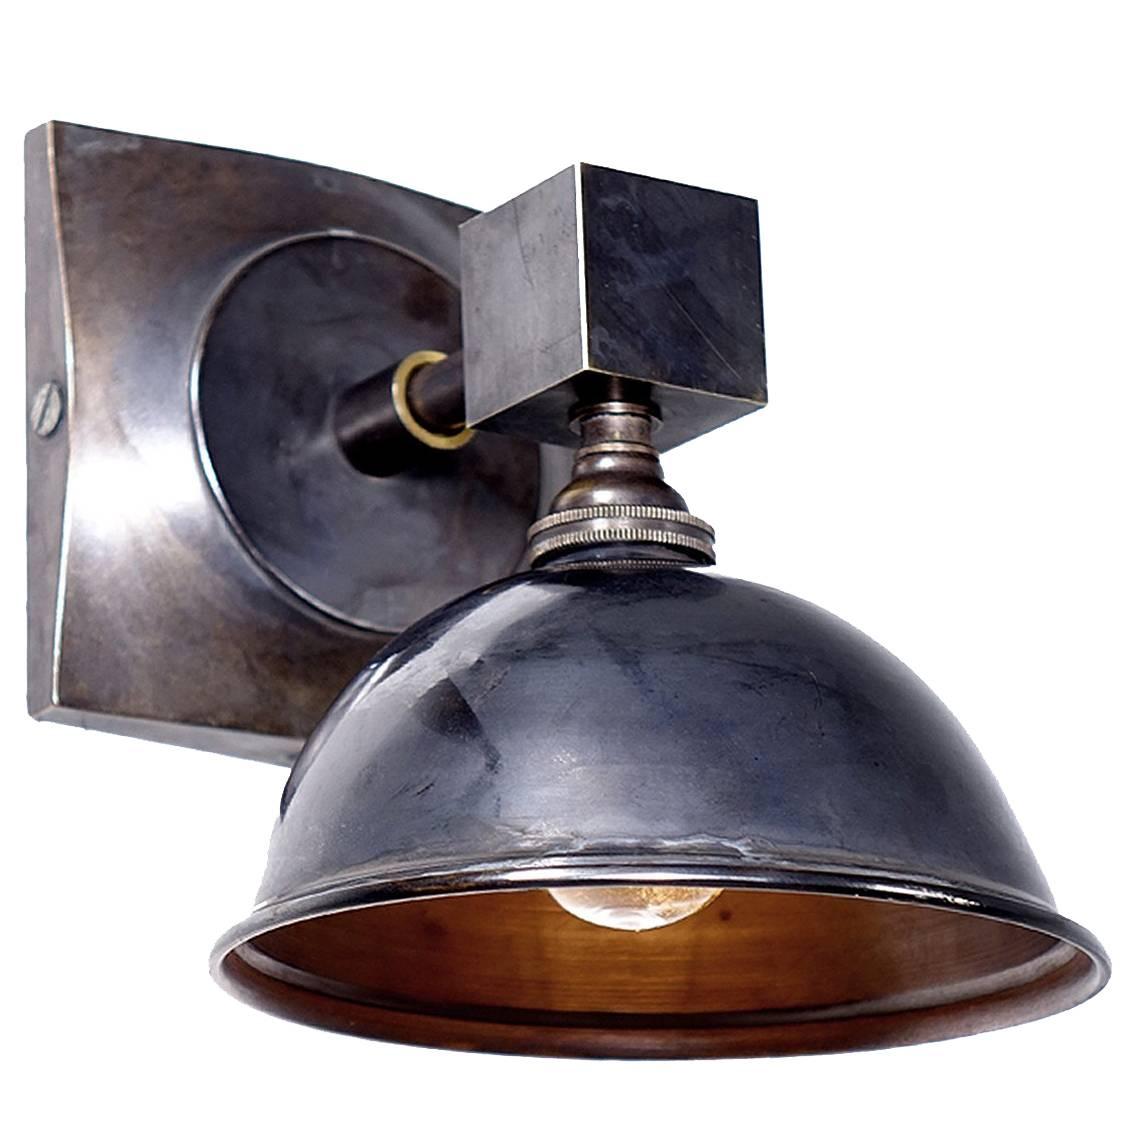 Cube and Dome Sconces